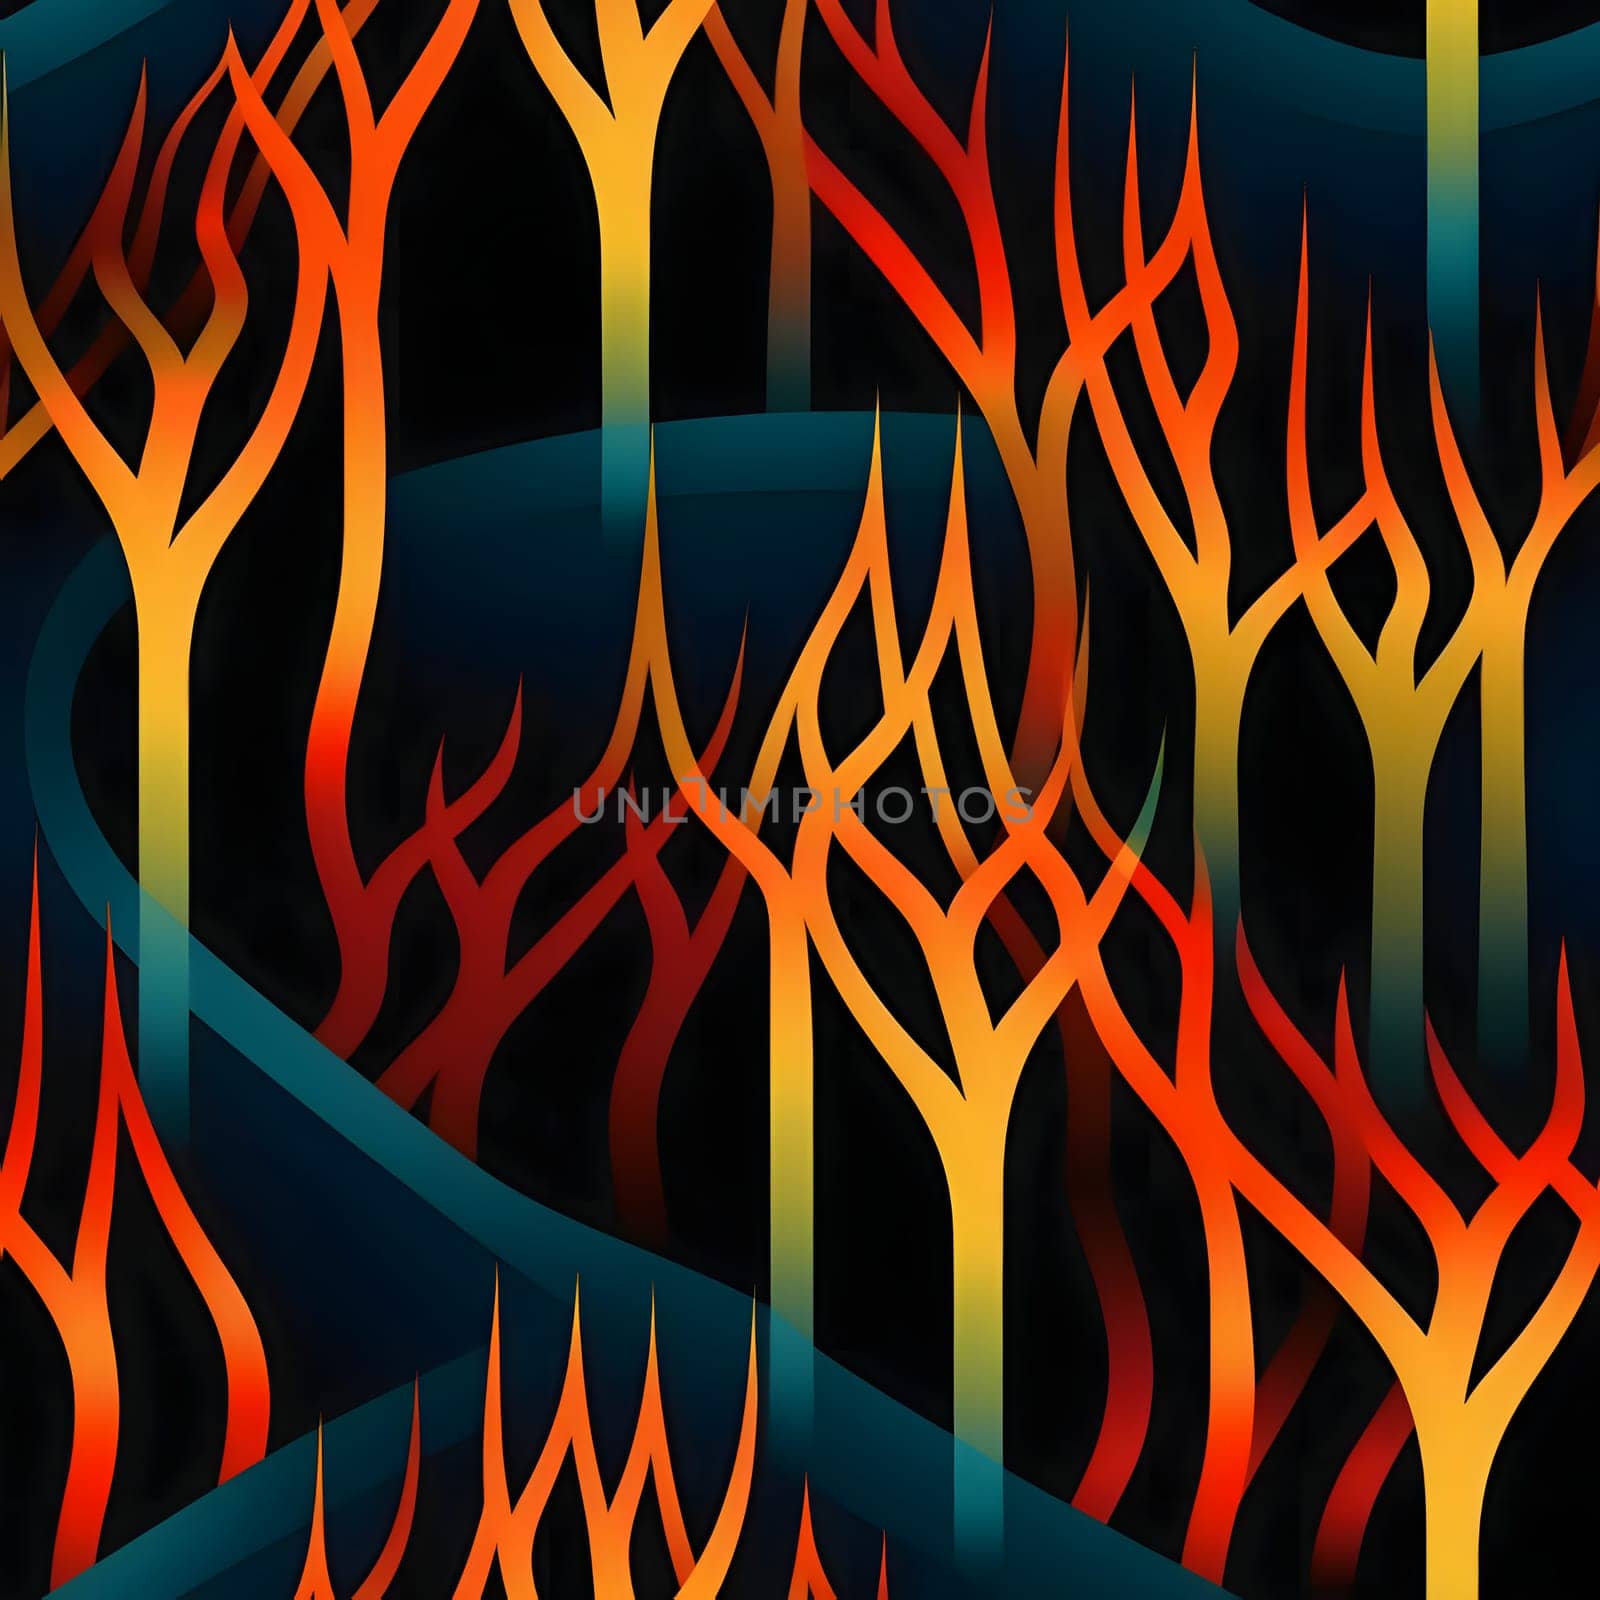 Patterns and banners backgrounds: Abstract background with tree branches and fire. Vector illustration. Eps 10.